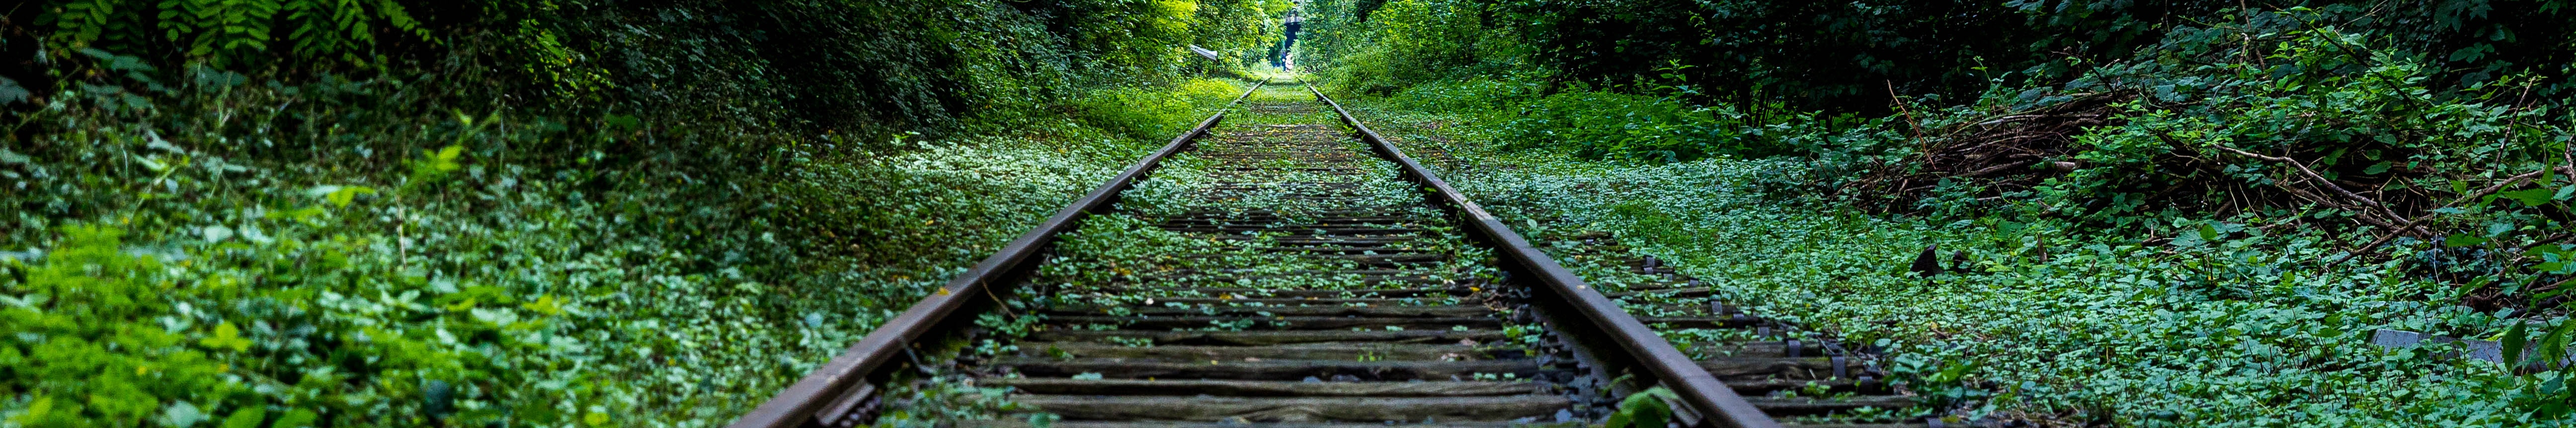 Norfolk operates 30,060 km of railroad, which overlaps natural habitat and endangers ecosystems.